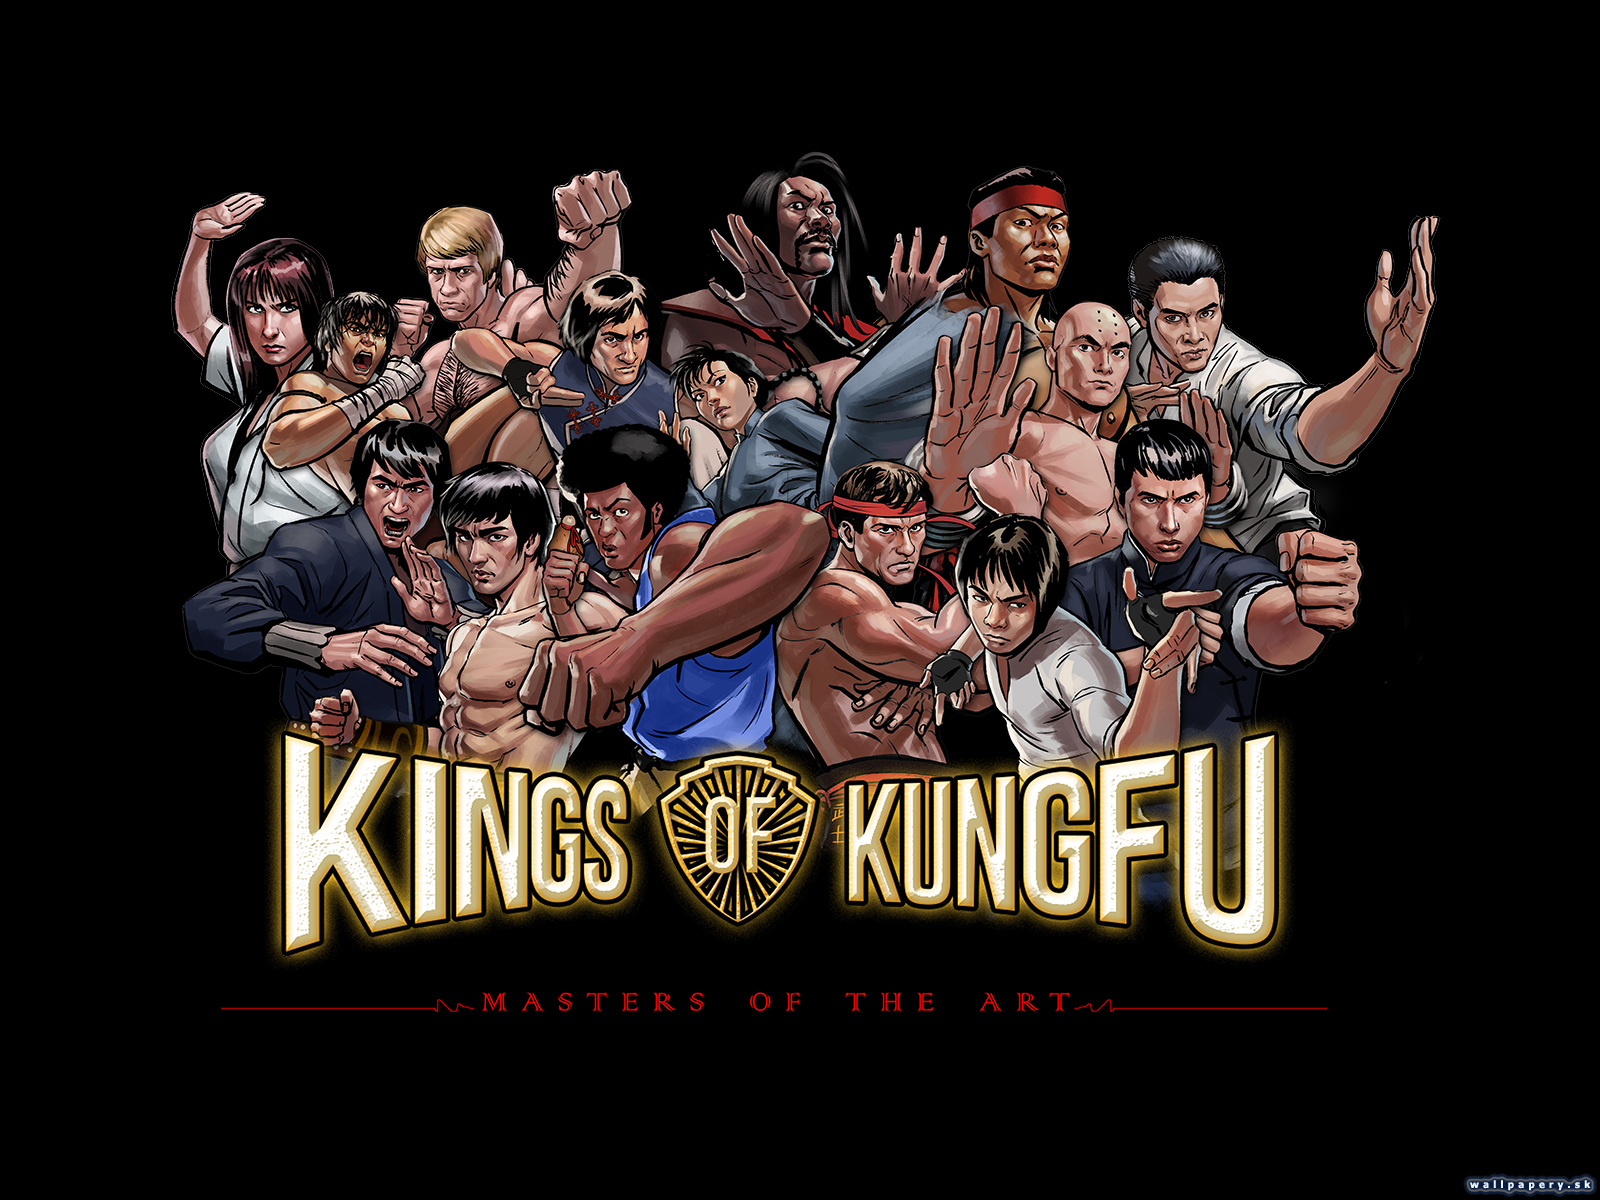 Kings of Kung Fu: Masters of the Art - wallpaper 1